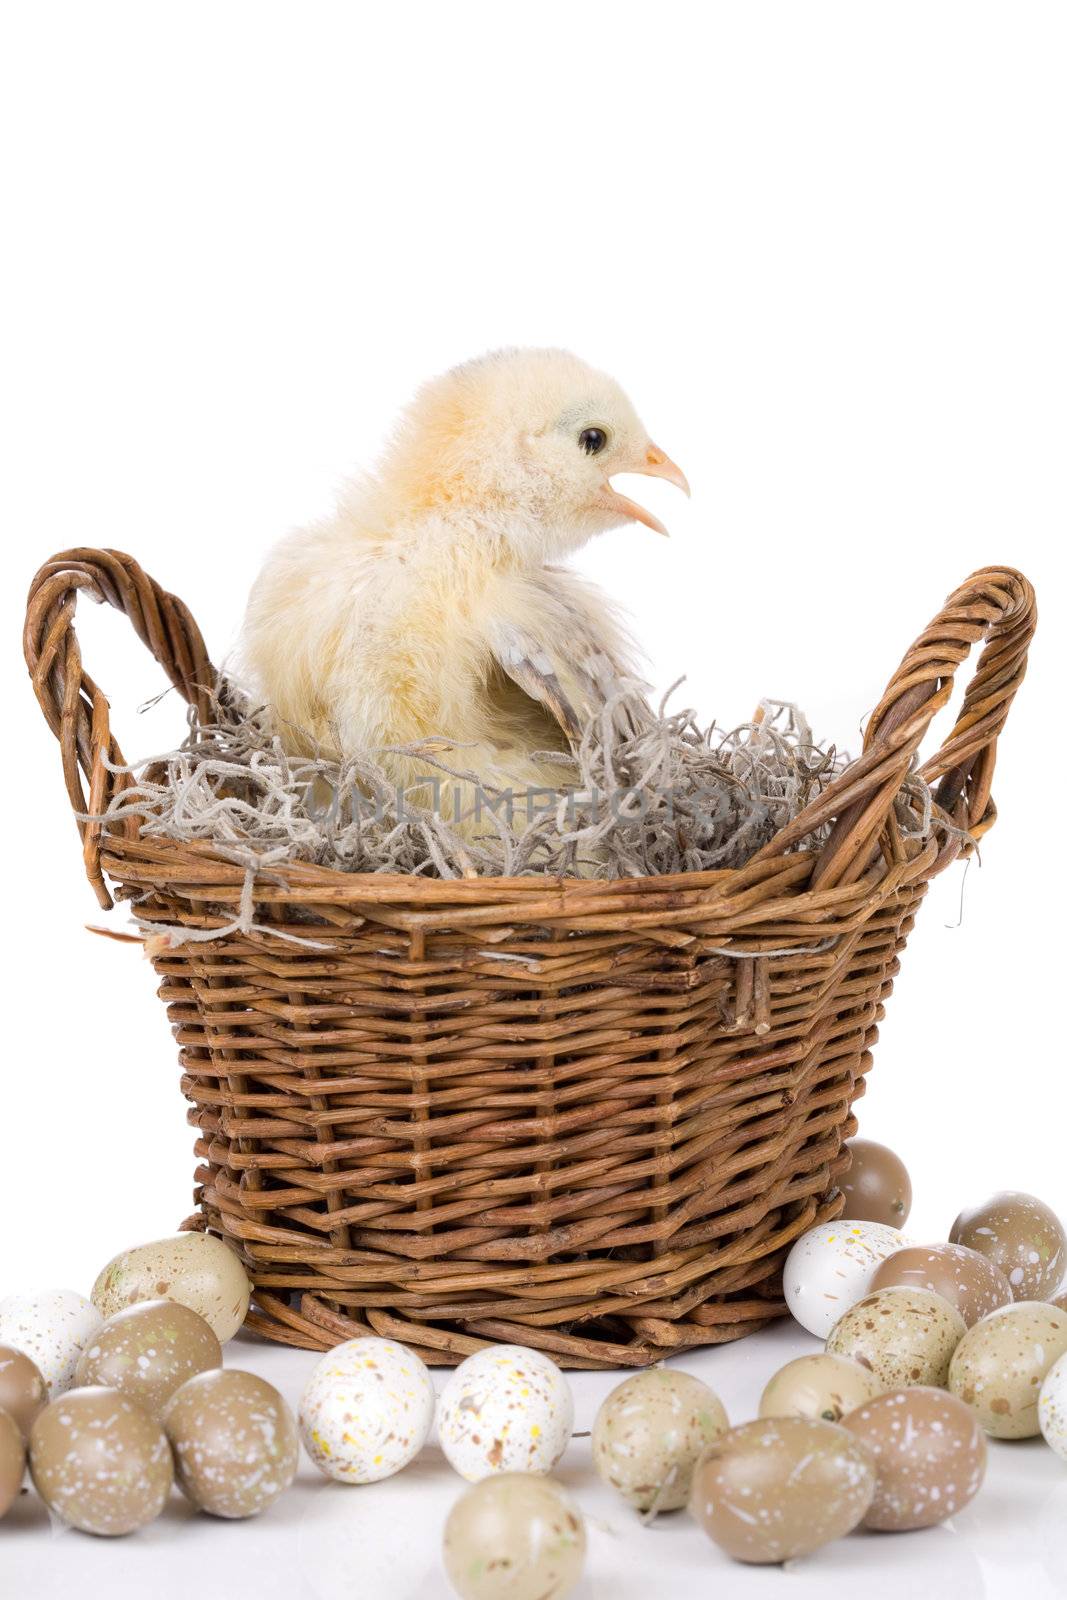 Small two week old chicken sitting in a basket surrounded by eggs